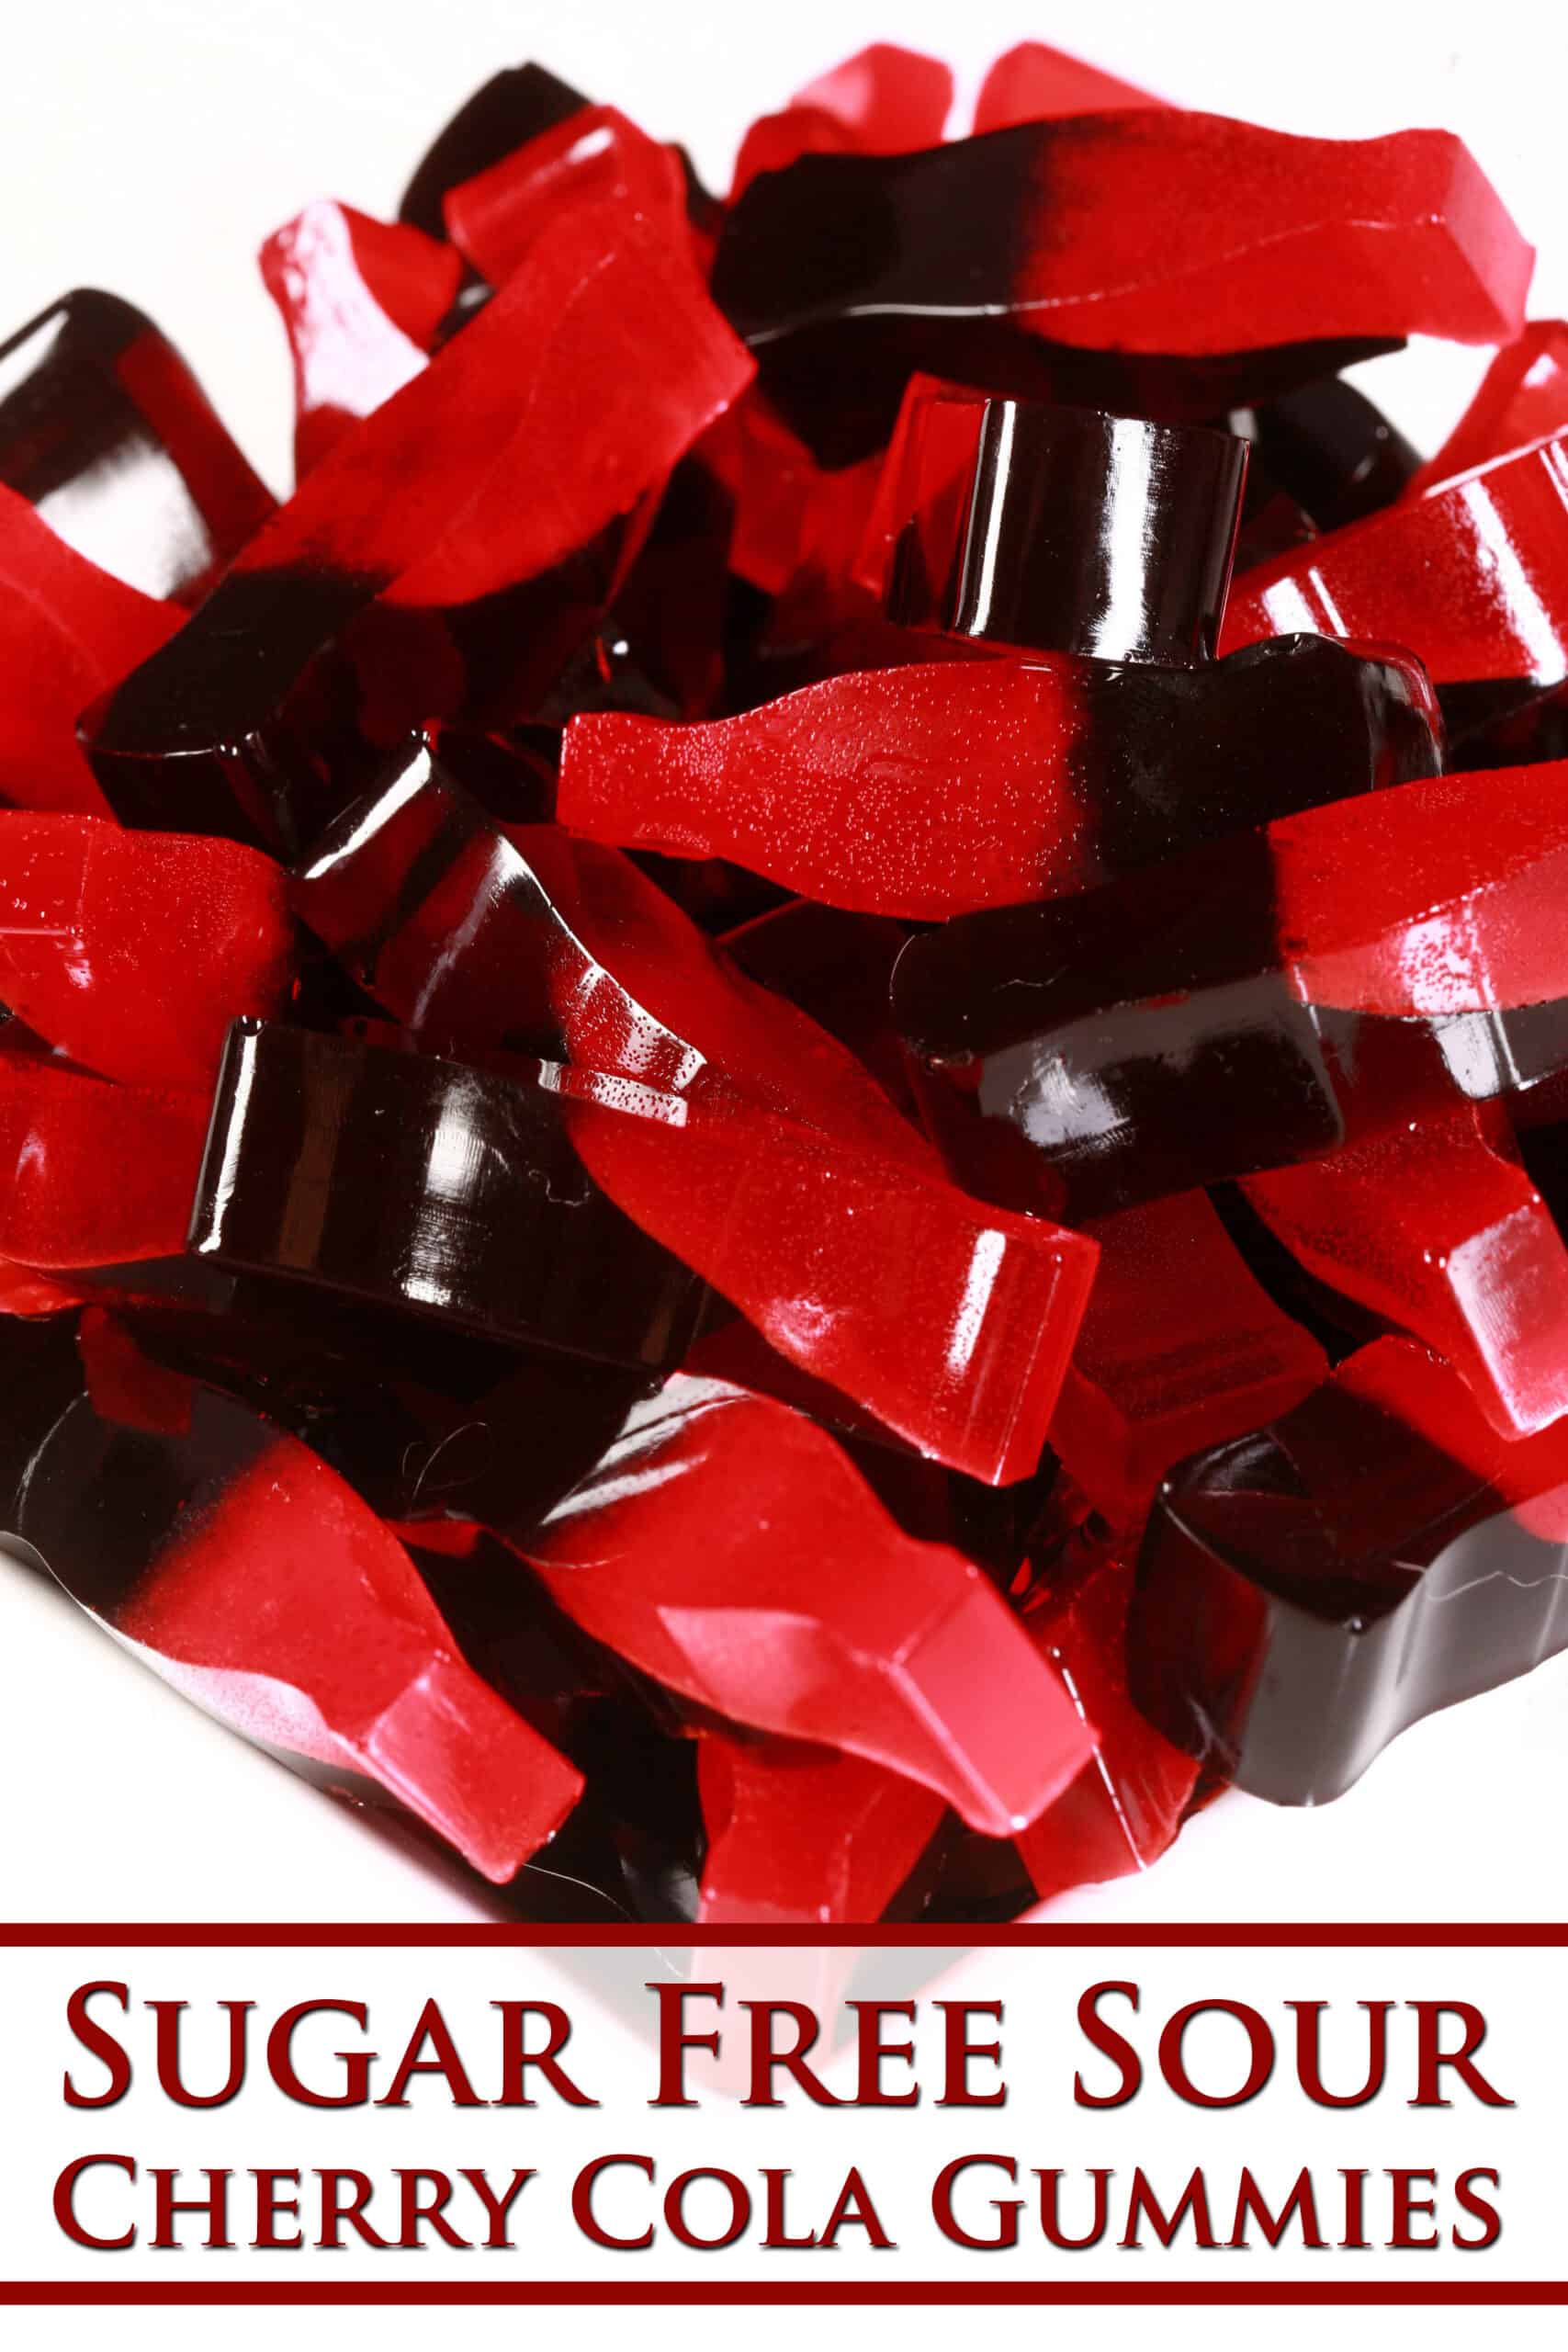 A pile of red and brown 2 coloured bottle shaped gummies.  Overlaid text says sugar free sour cherry cola gummies.